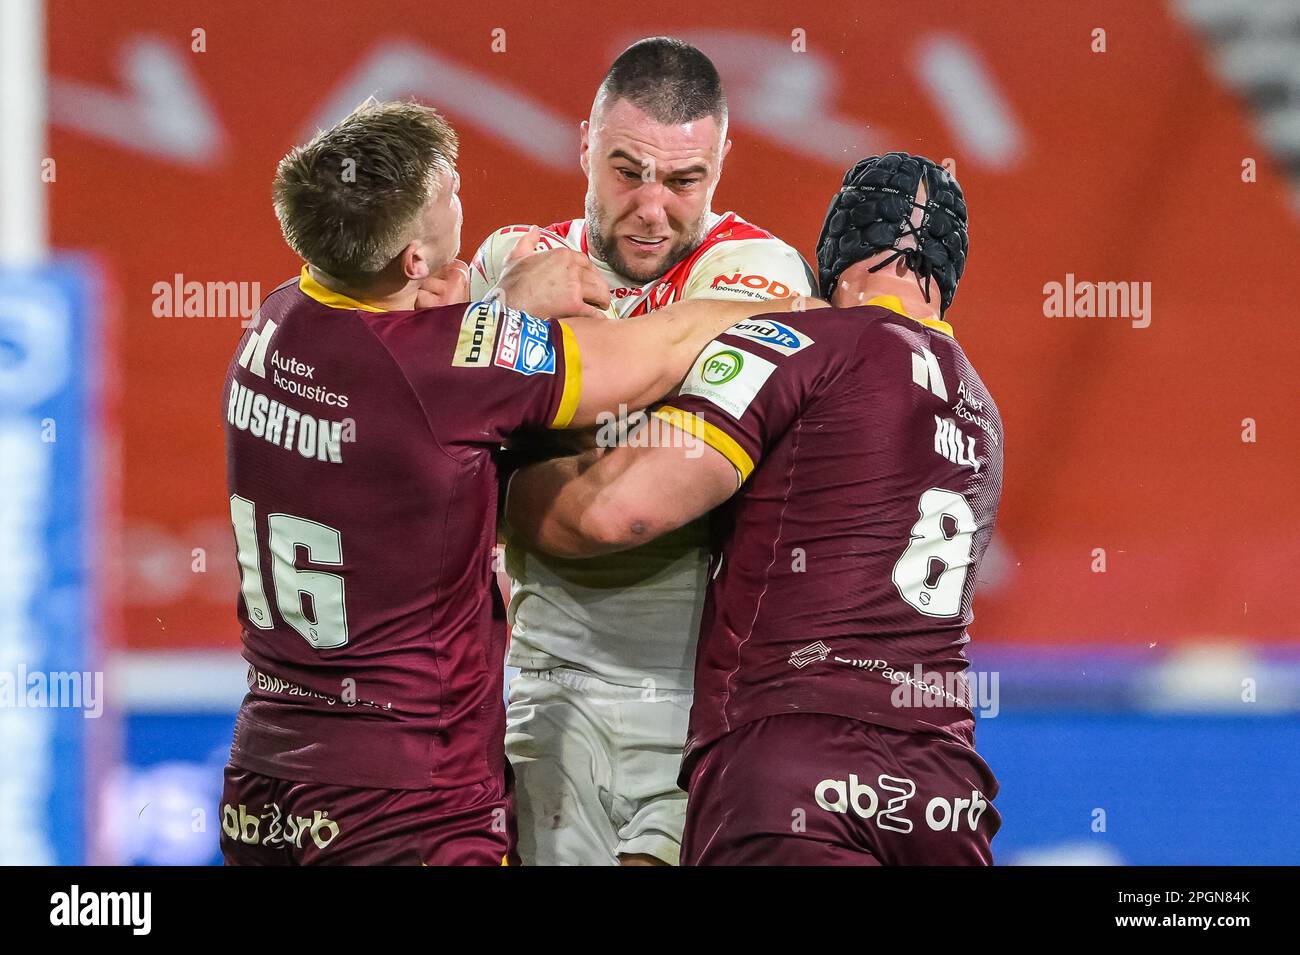 Curtis Sironen #16 of St Helens is tackled by Harry Rushton #16 and Chris Hill #8 of Huddersfield Giants during the Betfred Super League Round 6 match Huddersfield Giants vs St Helens at John Smith's Stadium, Huddersfield, United Kingdom, 23rd March 2023  (Photo by Craig Thomas/News Images) Stock Photo